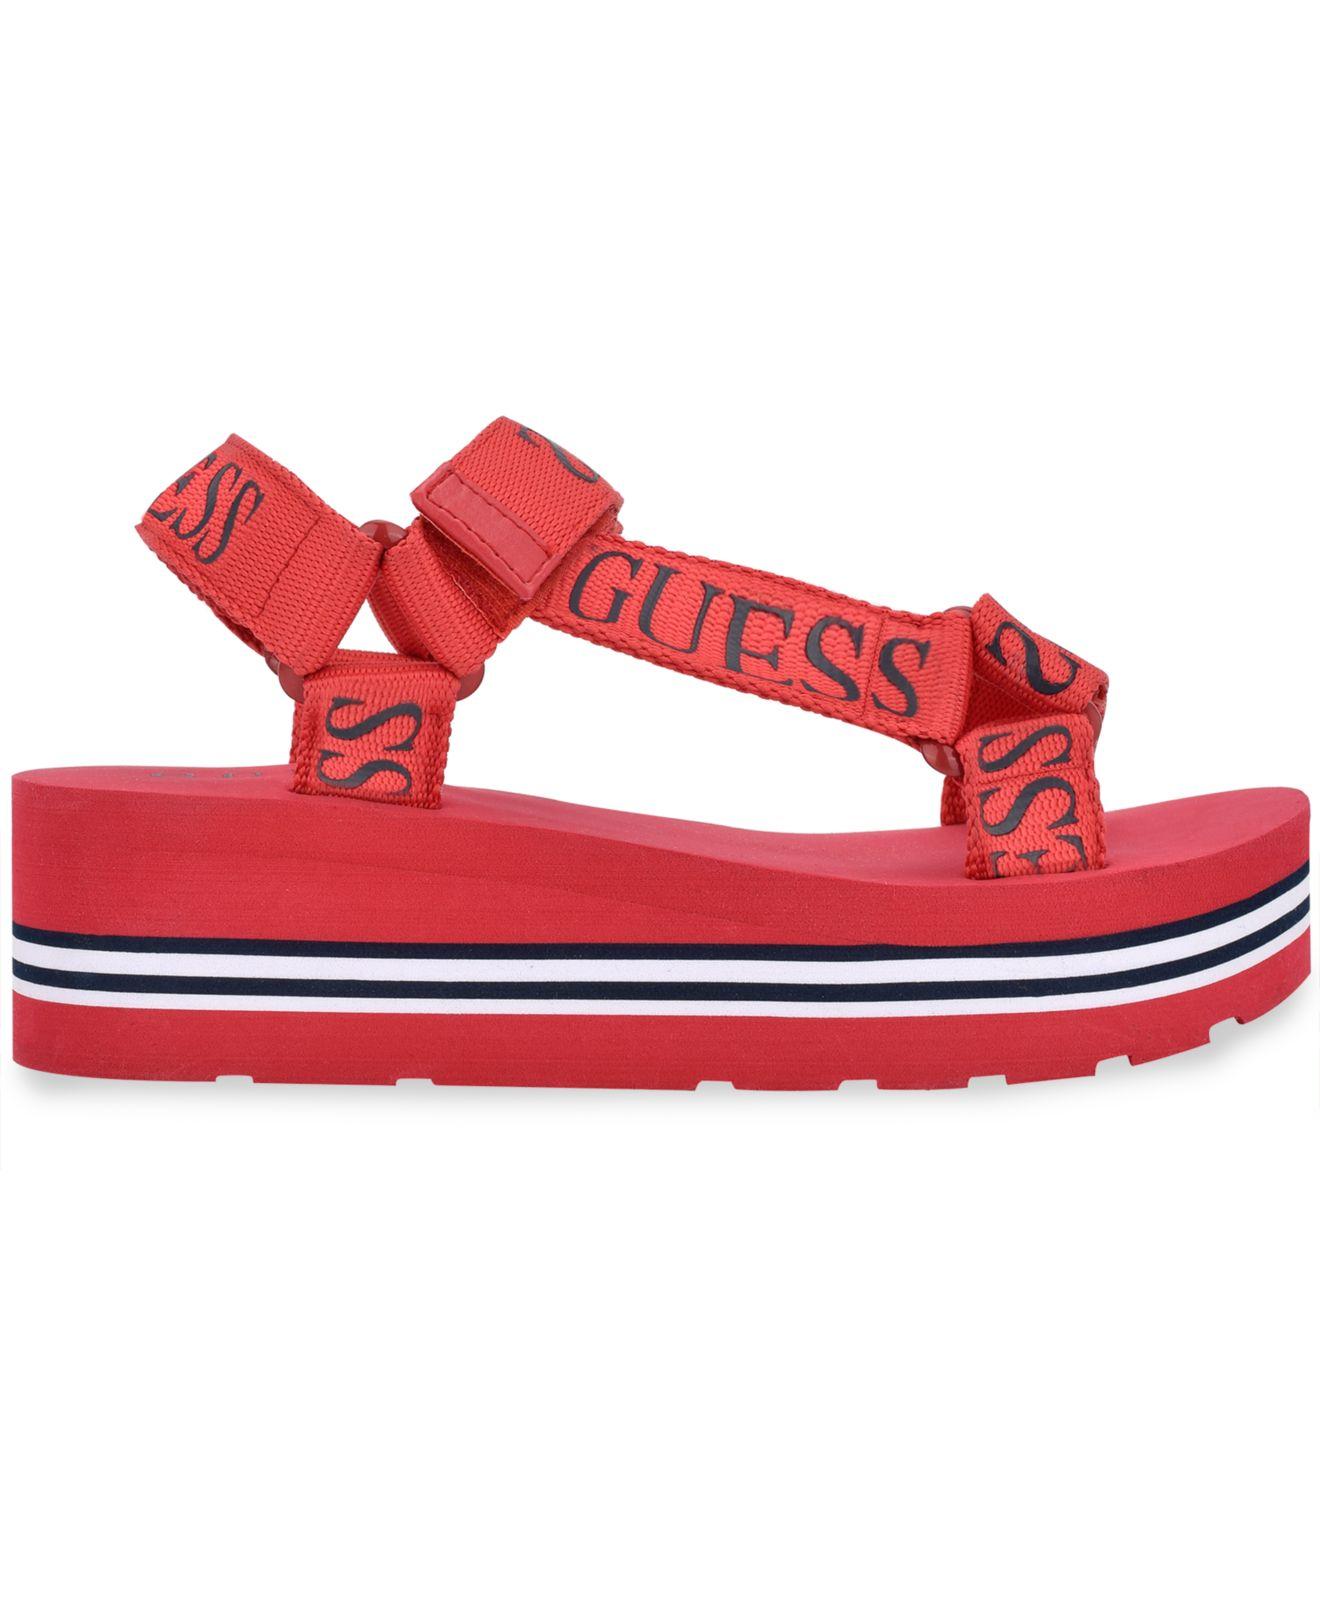 Guess Avin Strappy Platform Sandals in Red | Lyst